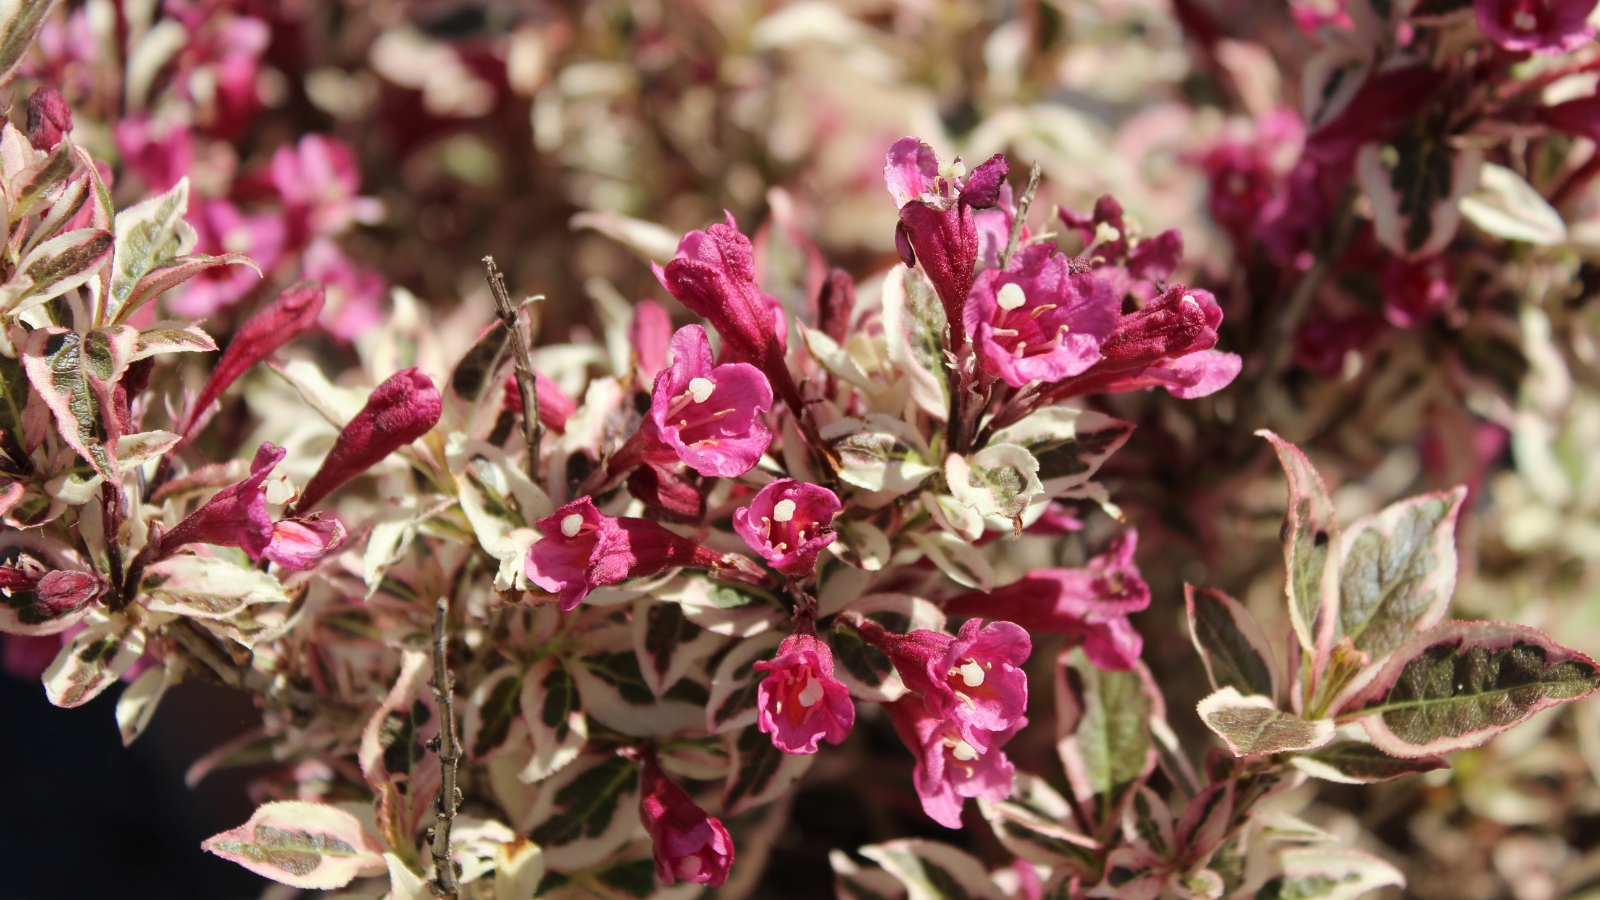 A 'My Monet Purple Effect' weigela shrub bathes in sunlight, flaunting its pink blooms and variegated foliage, creating a picturesque display of nature's artistry.